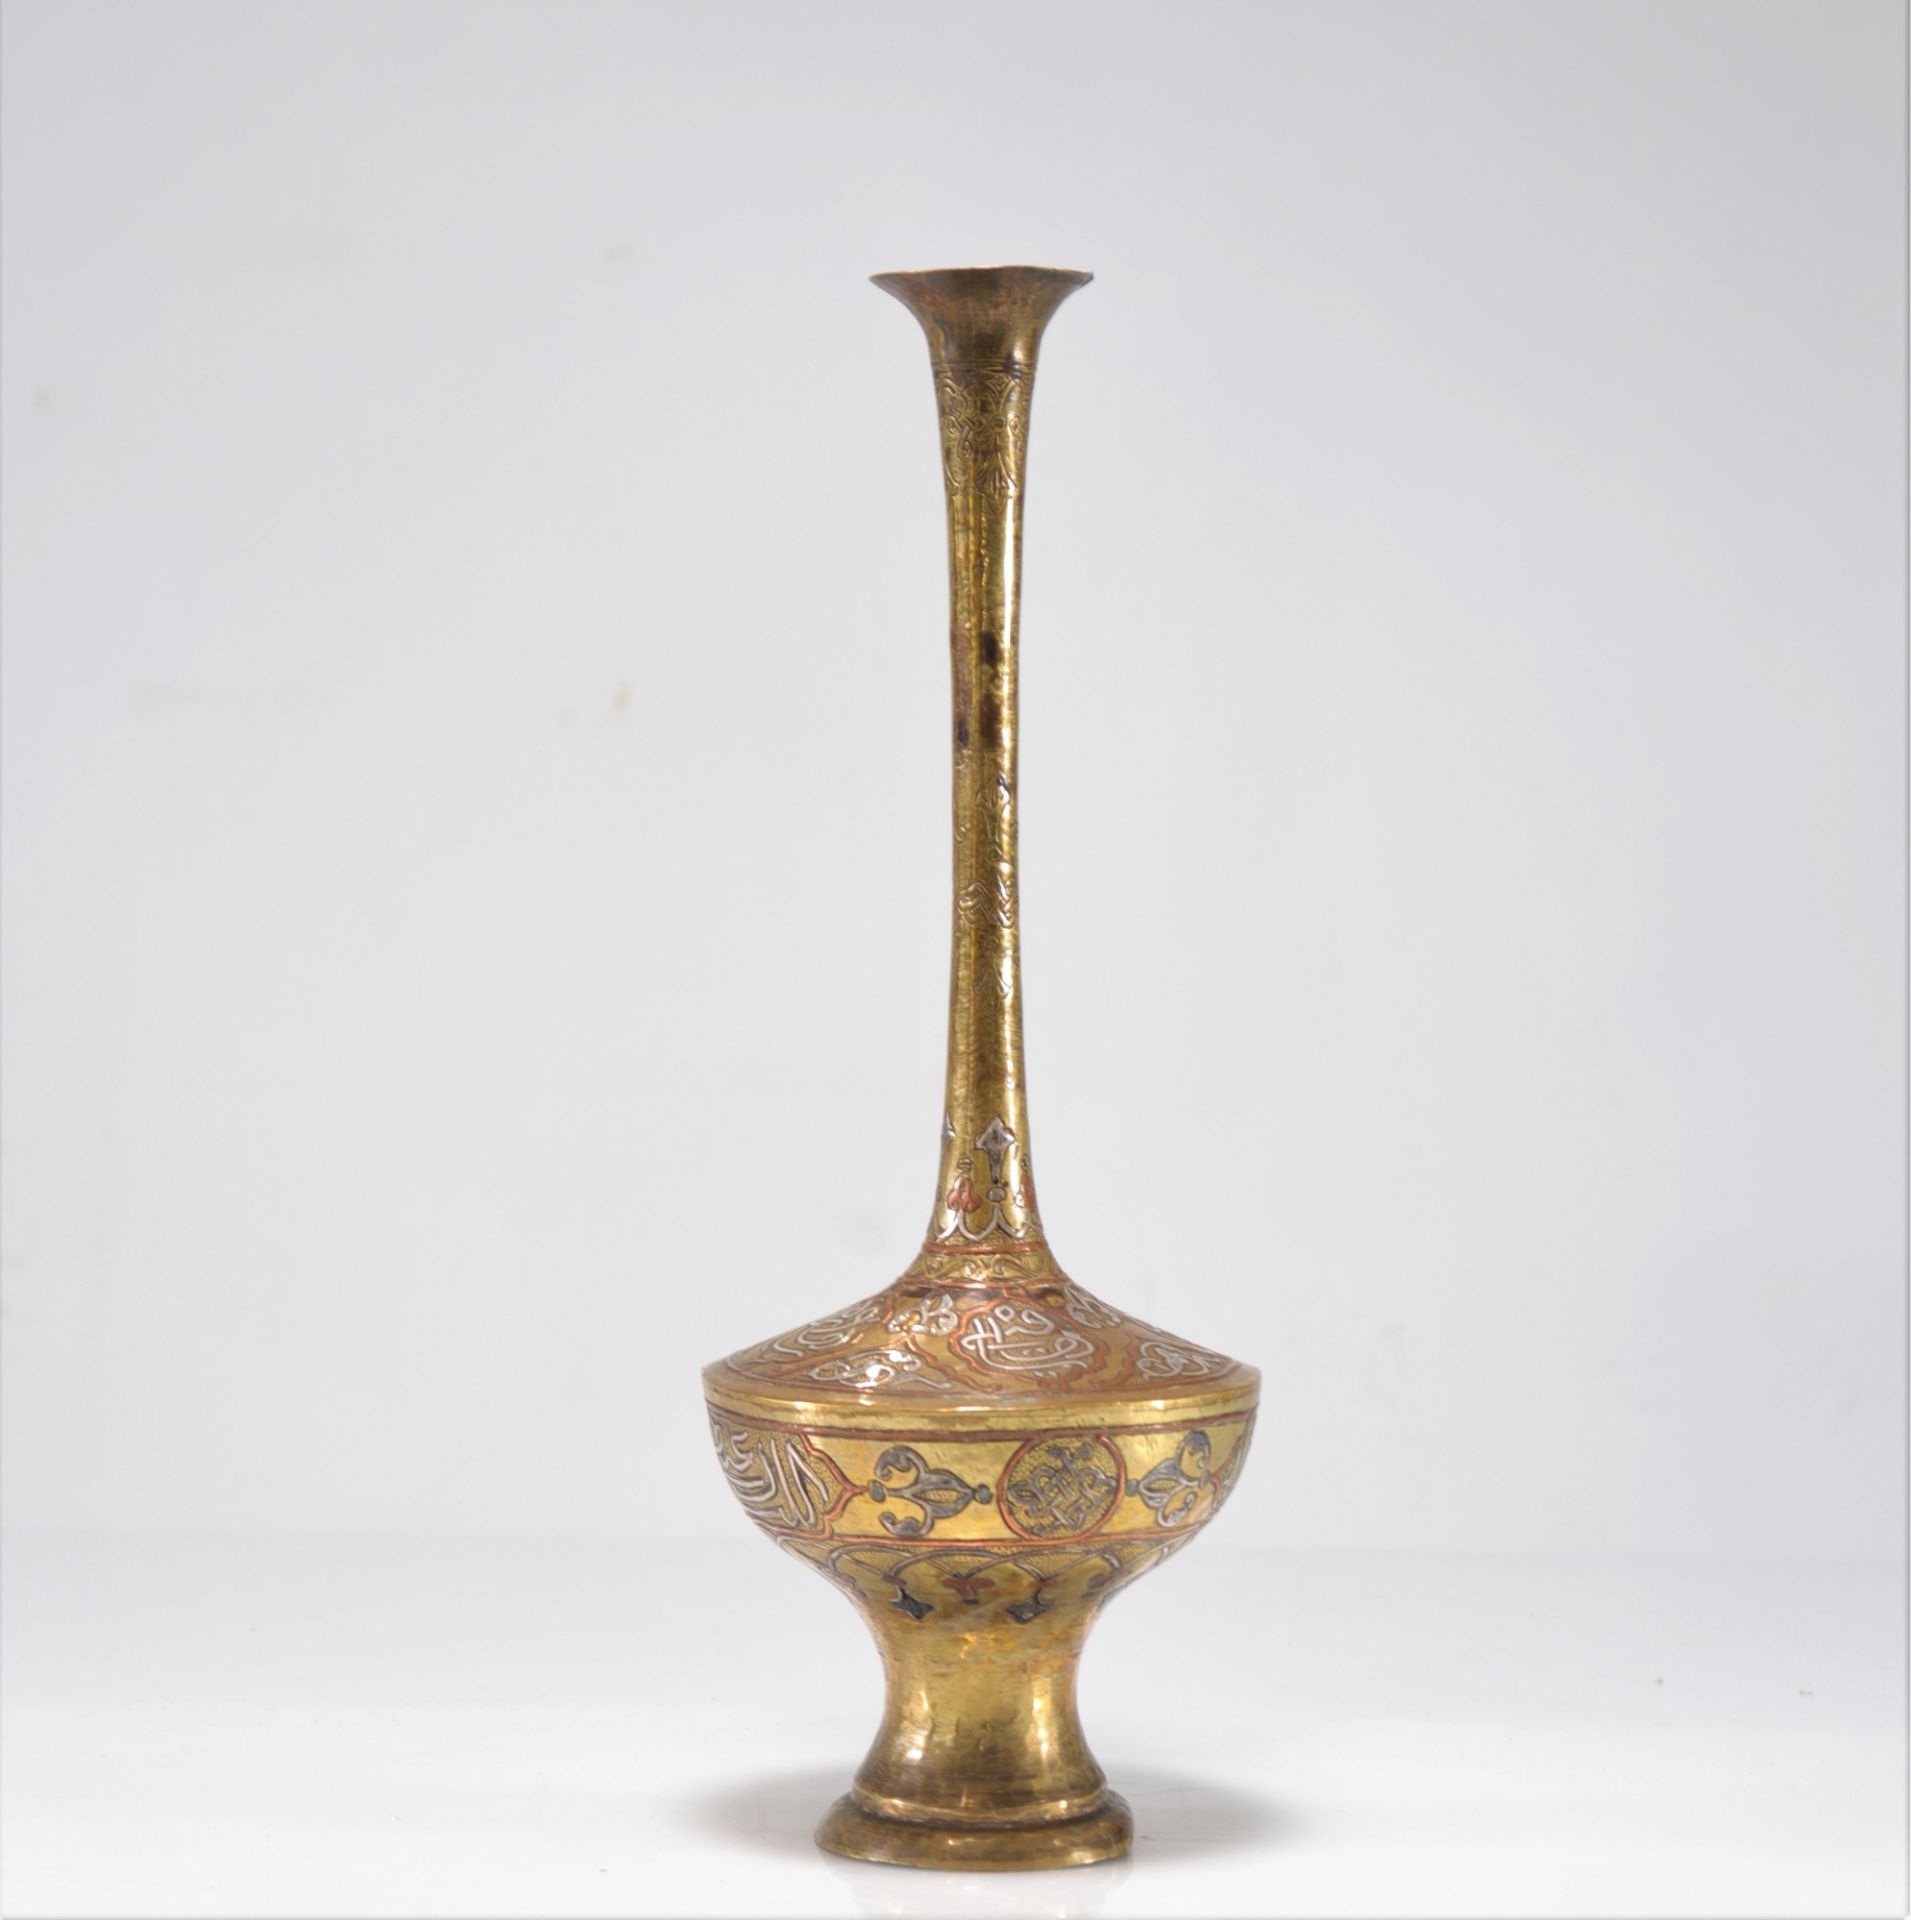 Ottoman vase brass and silver and copper inlay "Cairowe" - Image 3 of 5